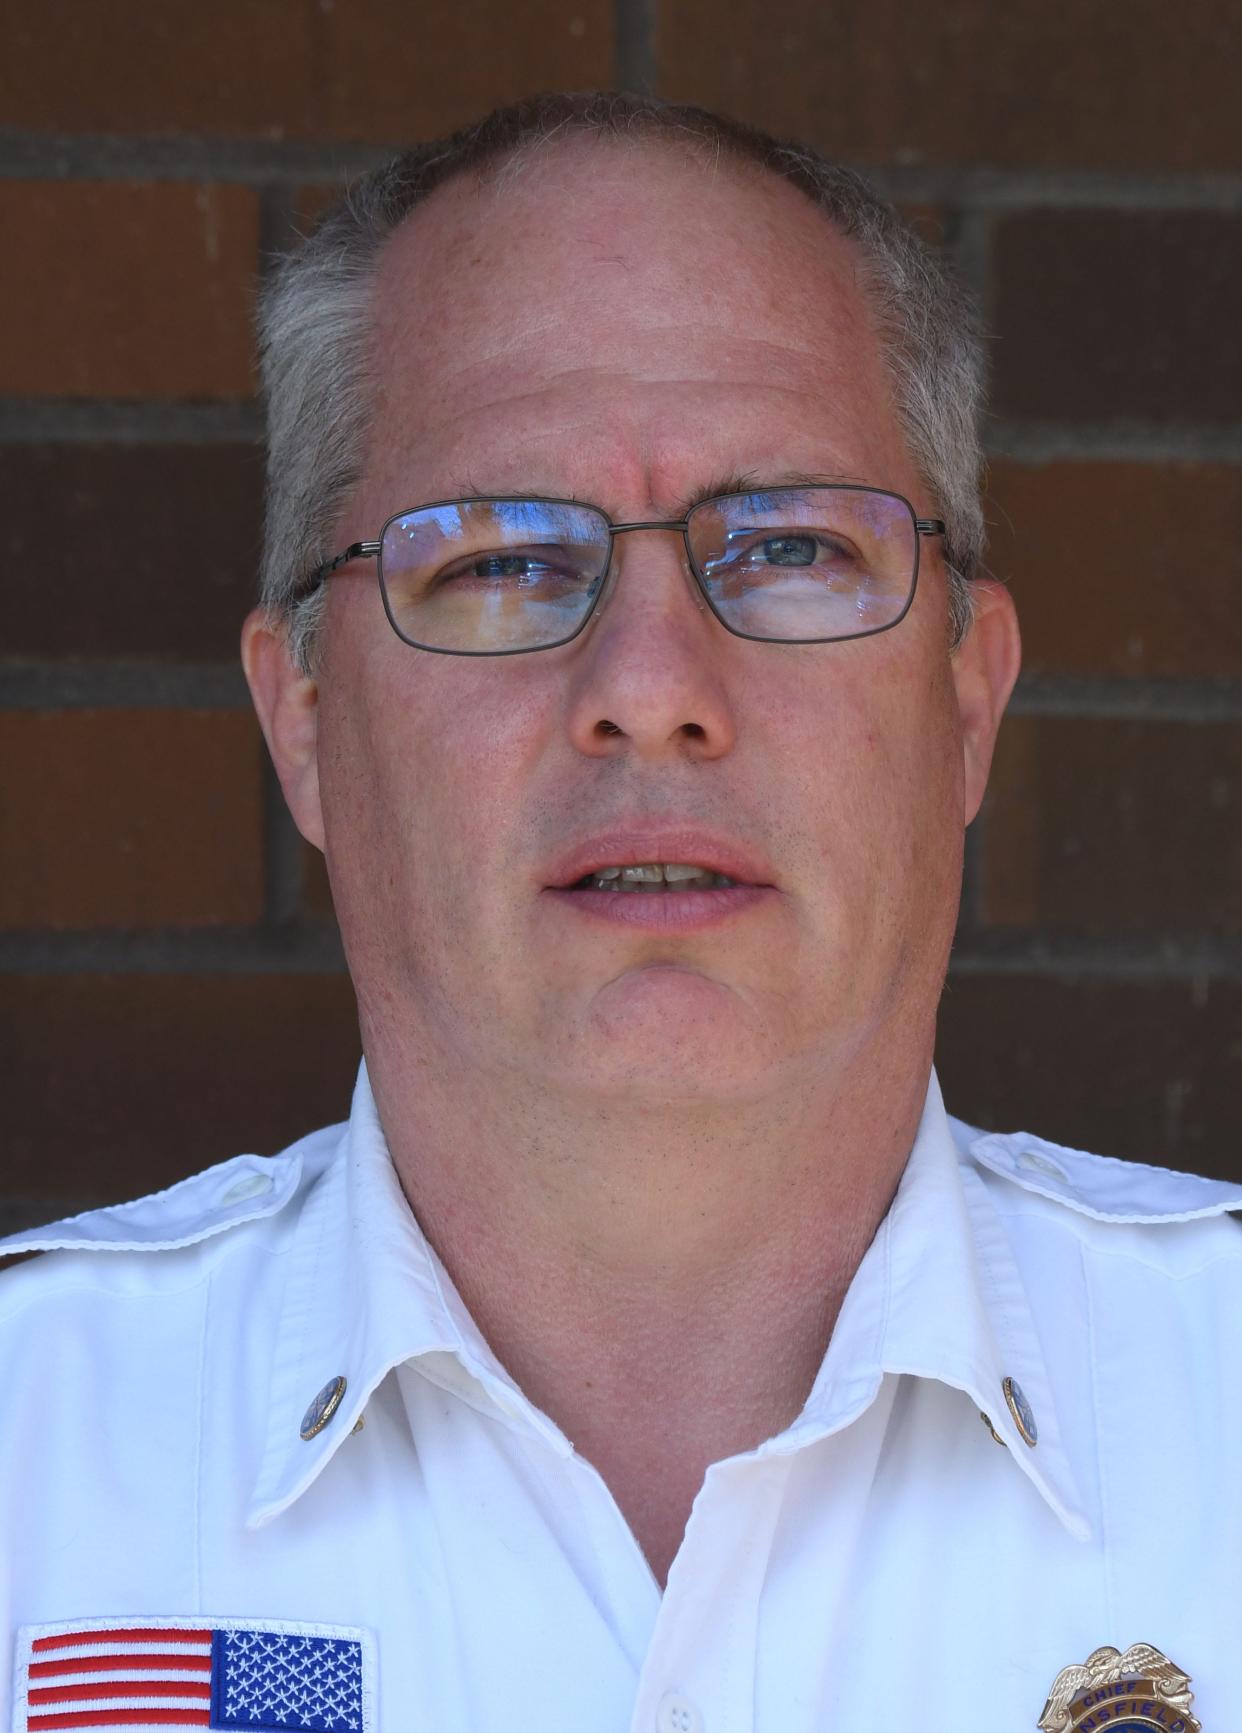 Mansfield Fire Chief Steve Strickling declined to comment after the firefighters' union issued a no-confidence vote against him on Thursday.